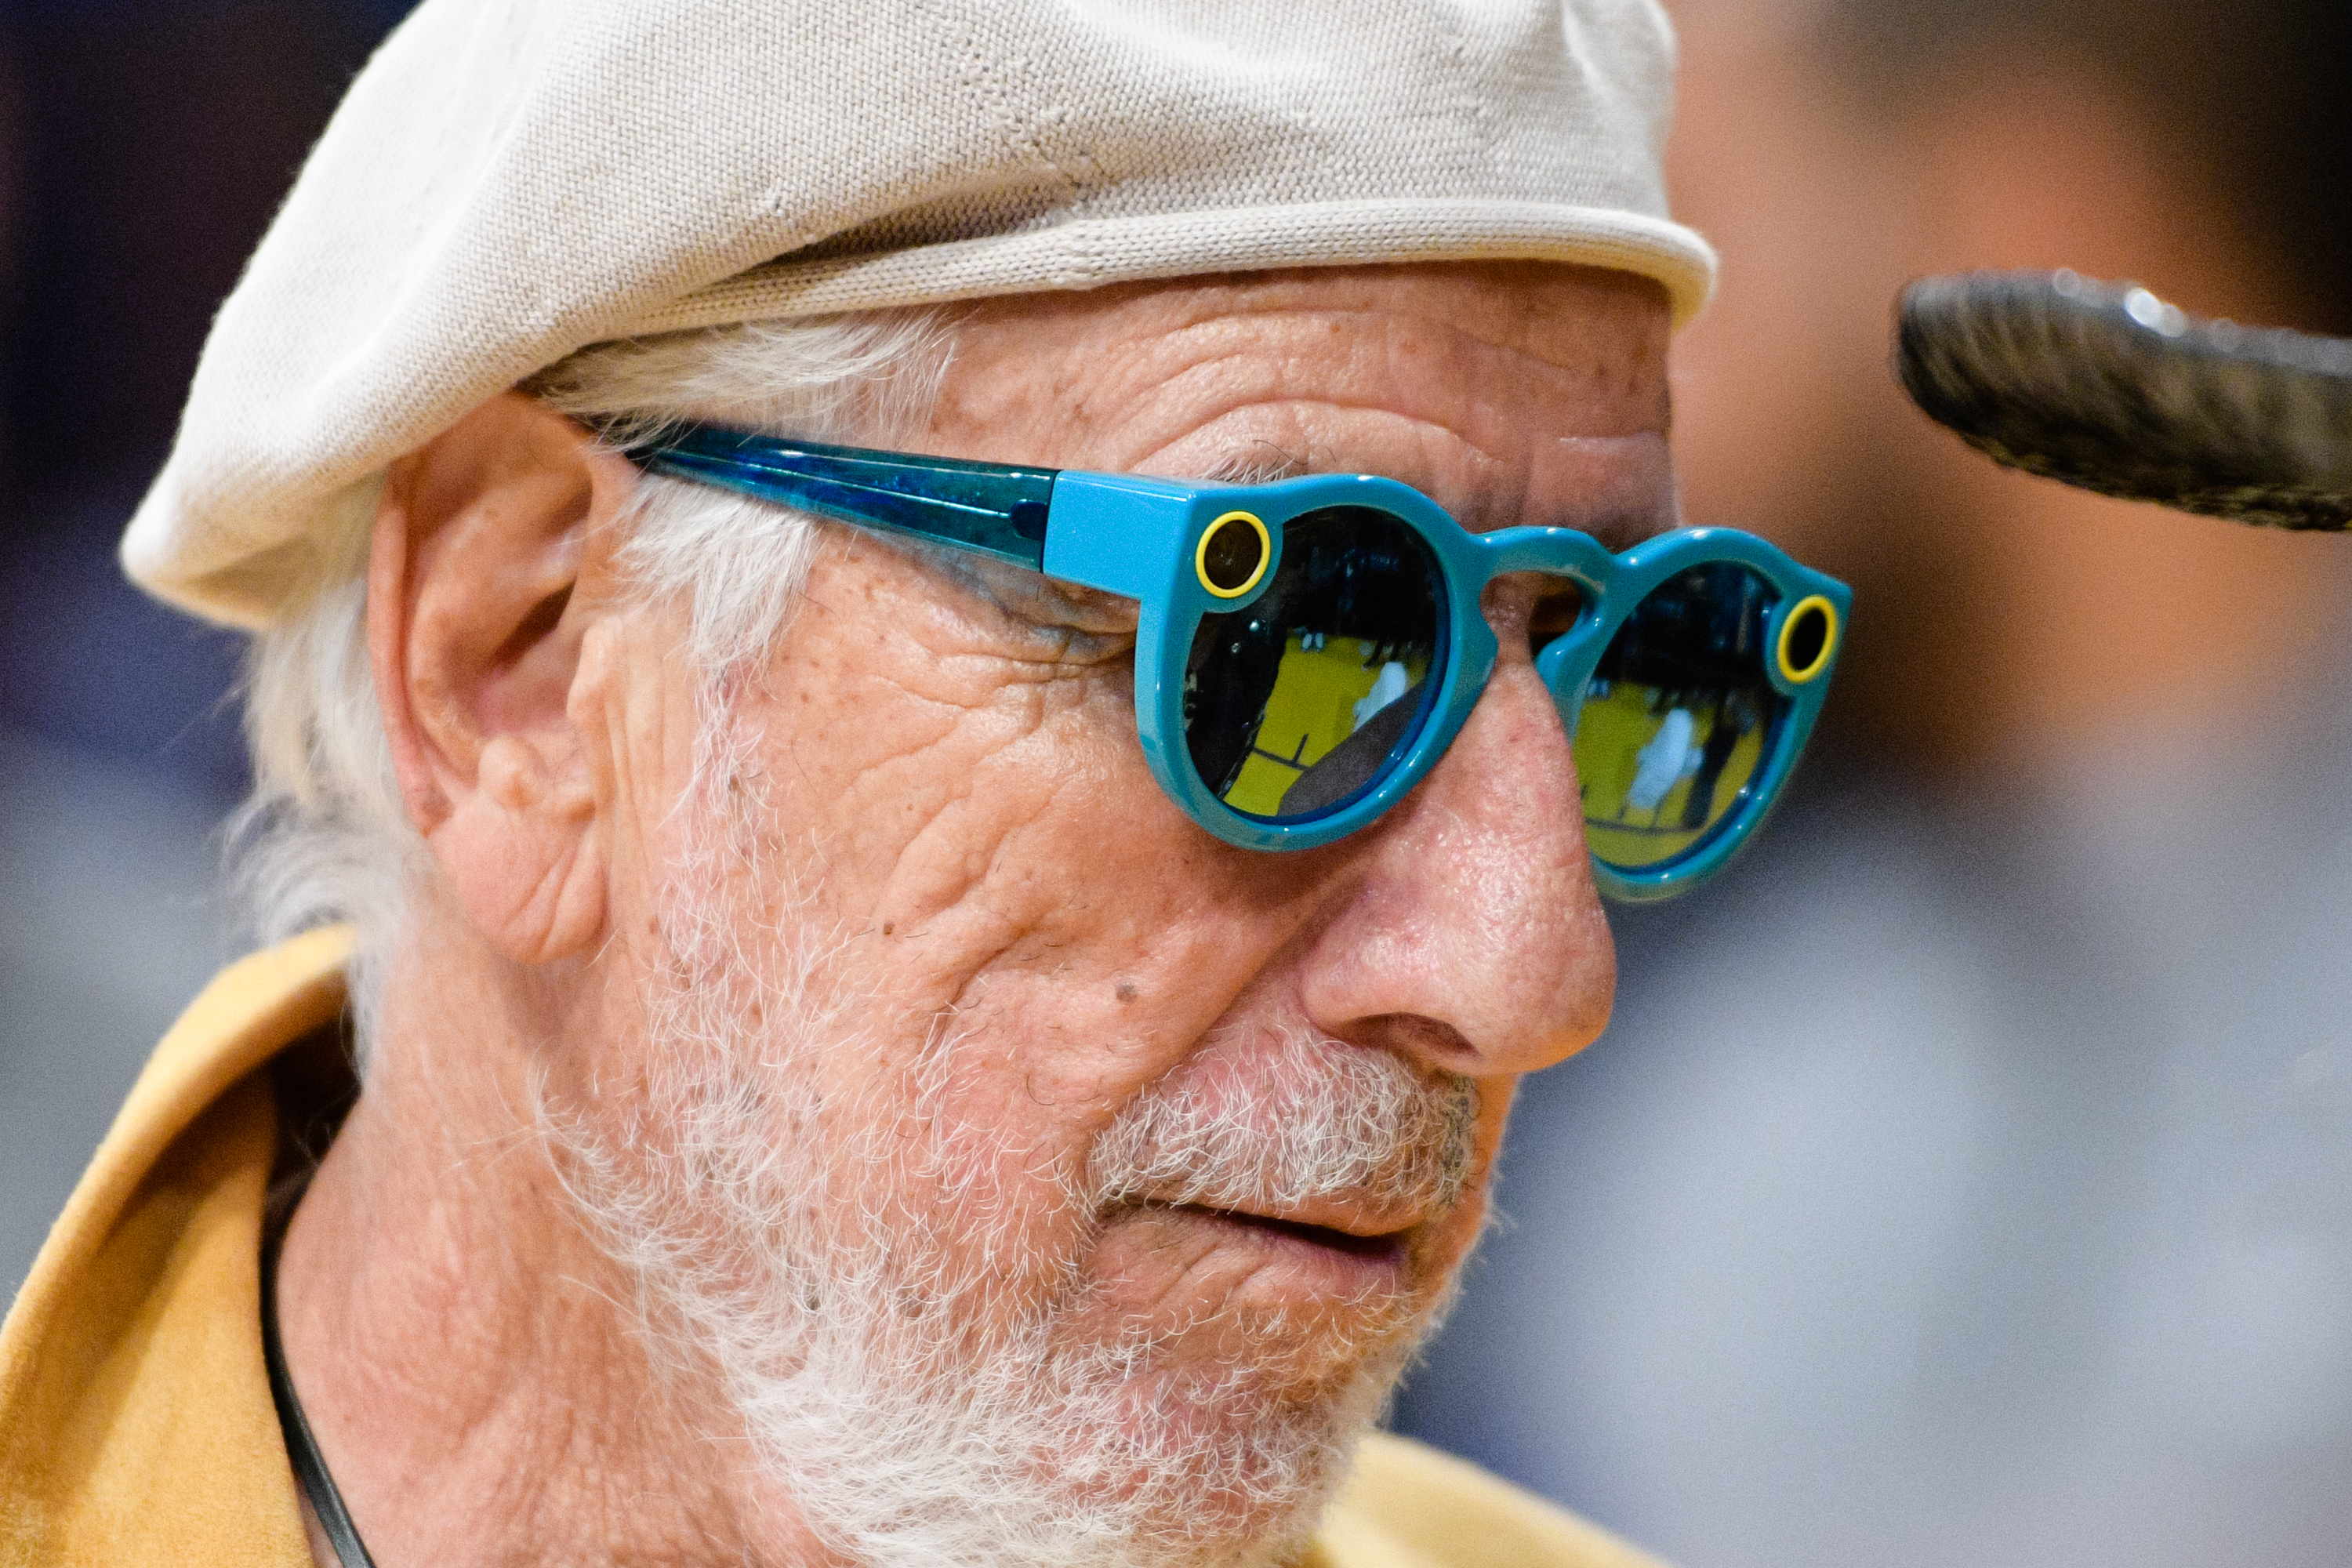 Lou Adler, wearing Snapchat's Spectacles, attends a basketball game between the Brooklyn Nets and the Los Angeles Lakers at Staples Center on November 15, 2016 in Los Angeles, California. (Noel Vasquez&mdash;Getty Images,)